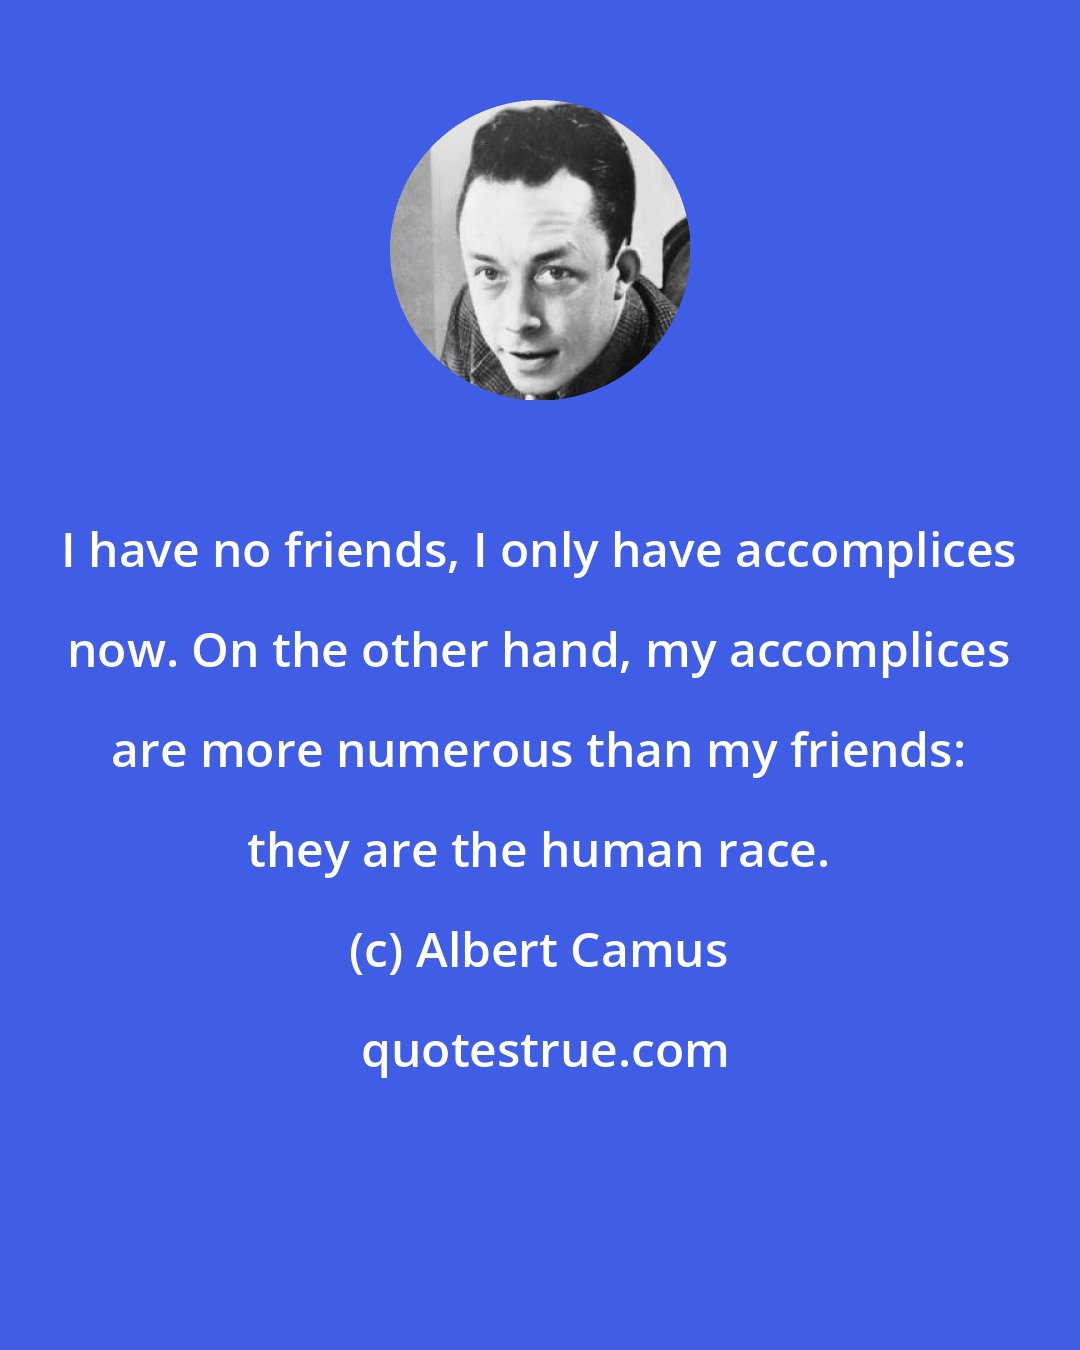 Albert Camus: I have no friends, I only have accomplices now. On the other hand, my accomplices are more numerous than my friends: they are the human race.